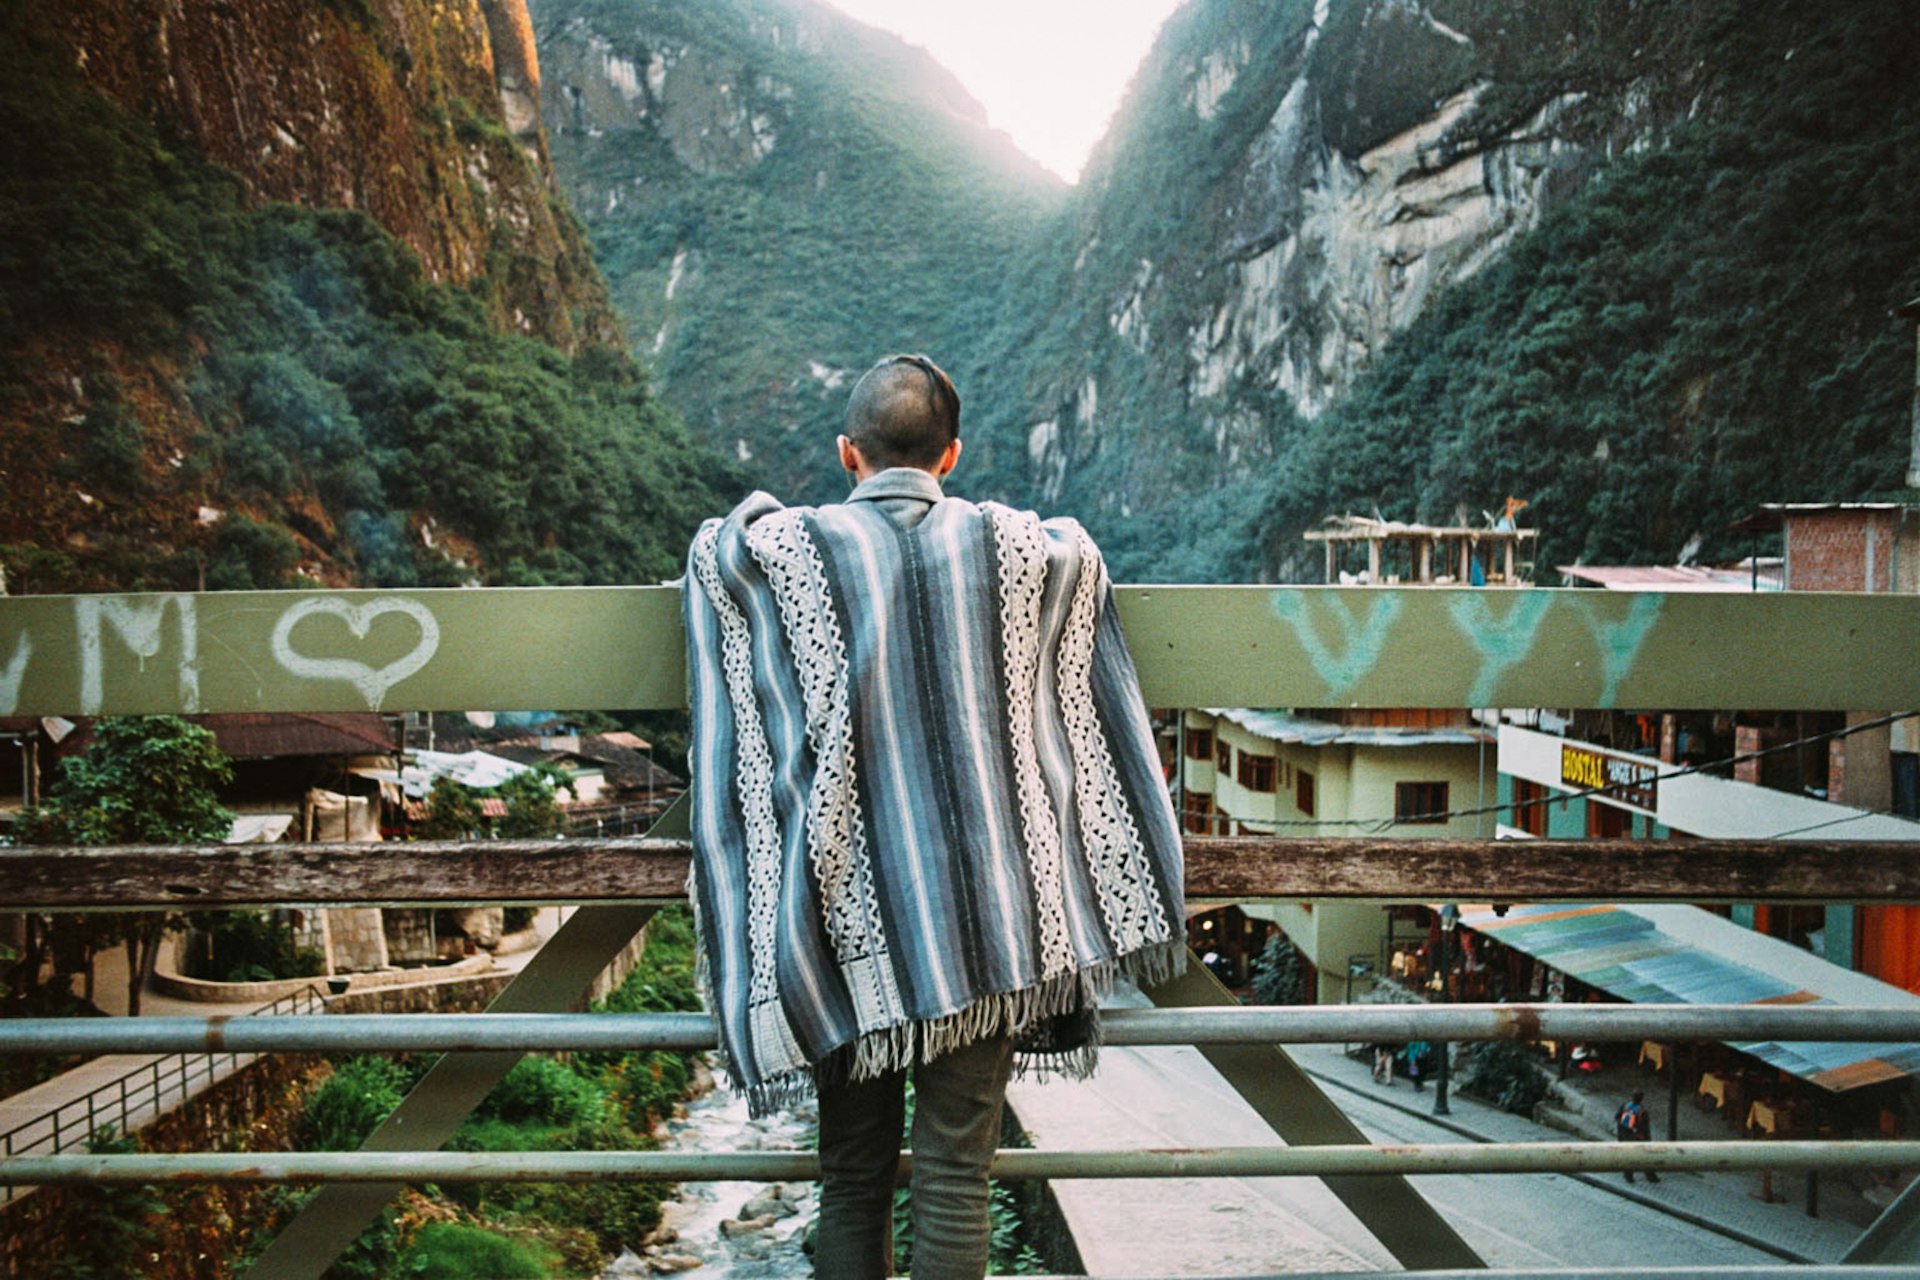 A man in a poncho looks over the side of the bridge at the valley in Aguascalientes © Canela Rodal / EyeEm / Getty Images